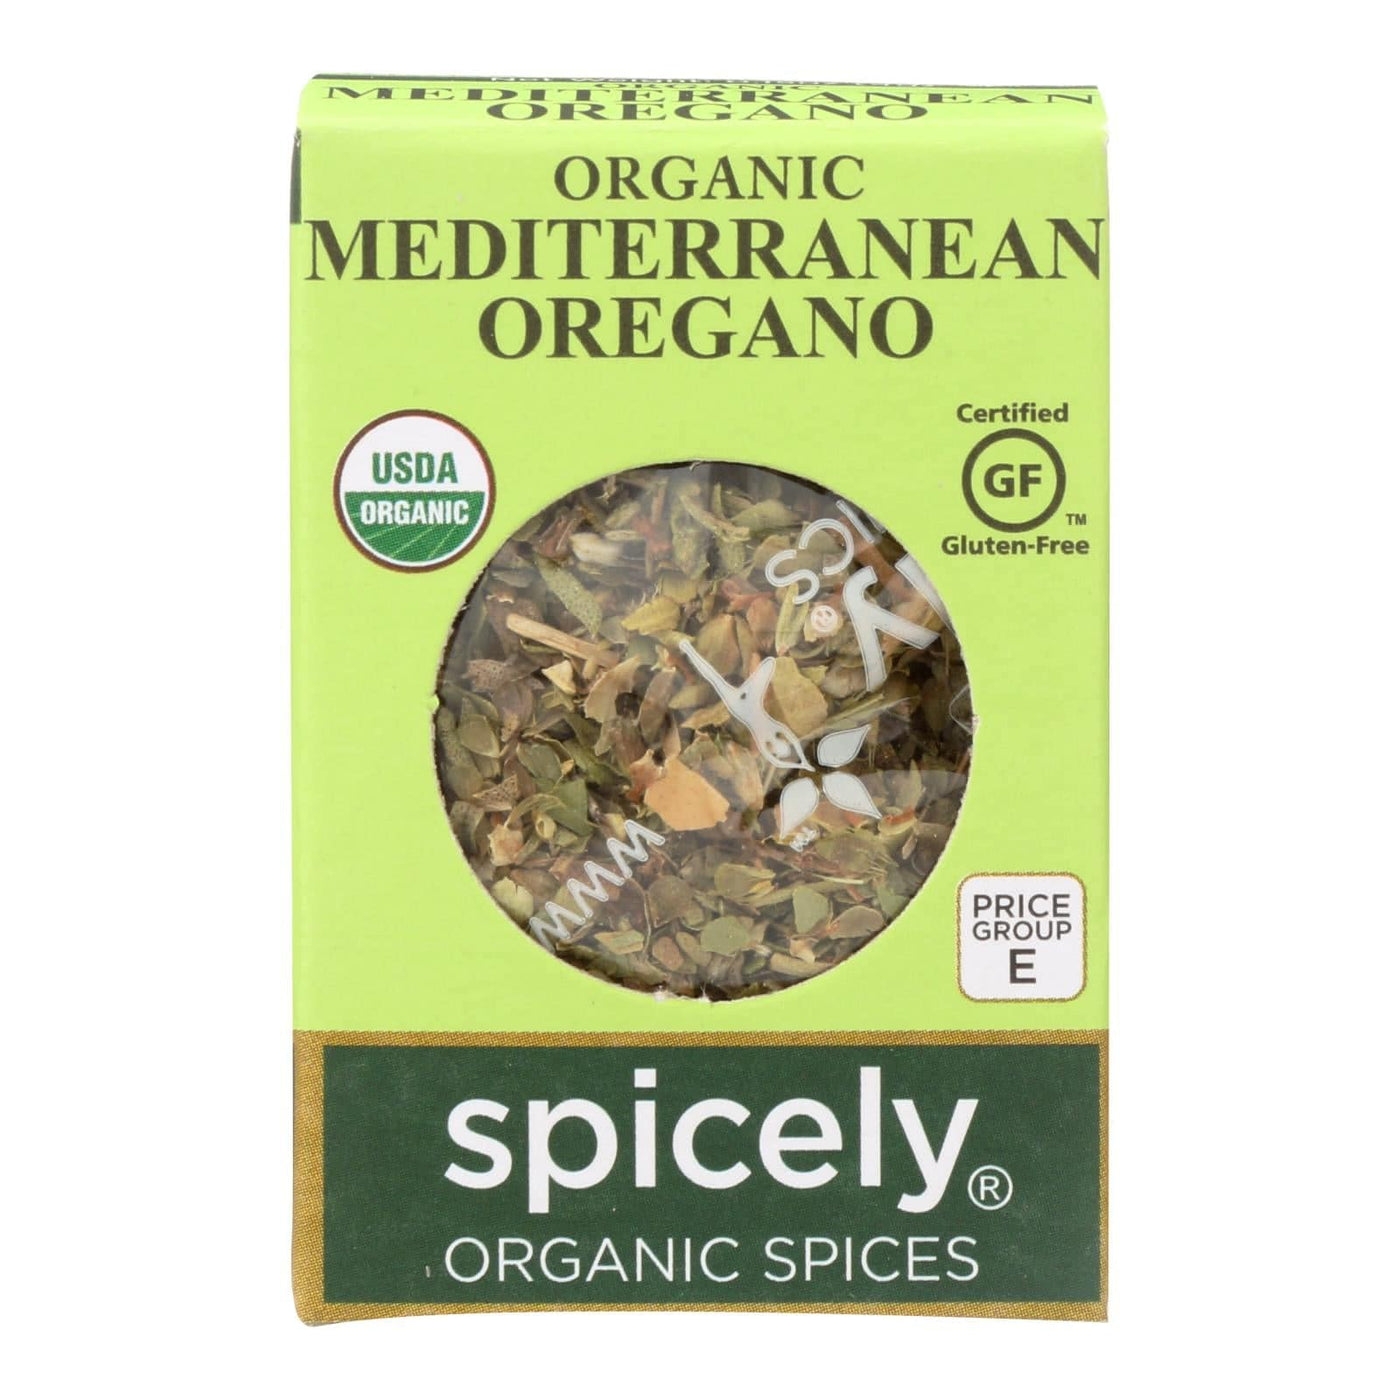 Buy Spicely Organics - Organic Oregano - Case Of 6 - 0.15 Oz.  at OnlyNaturals.us